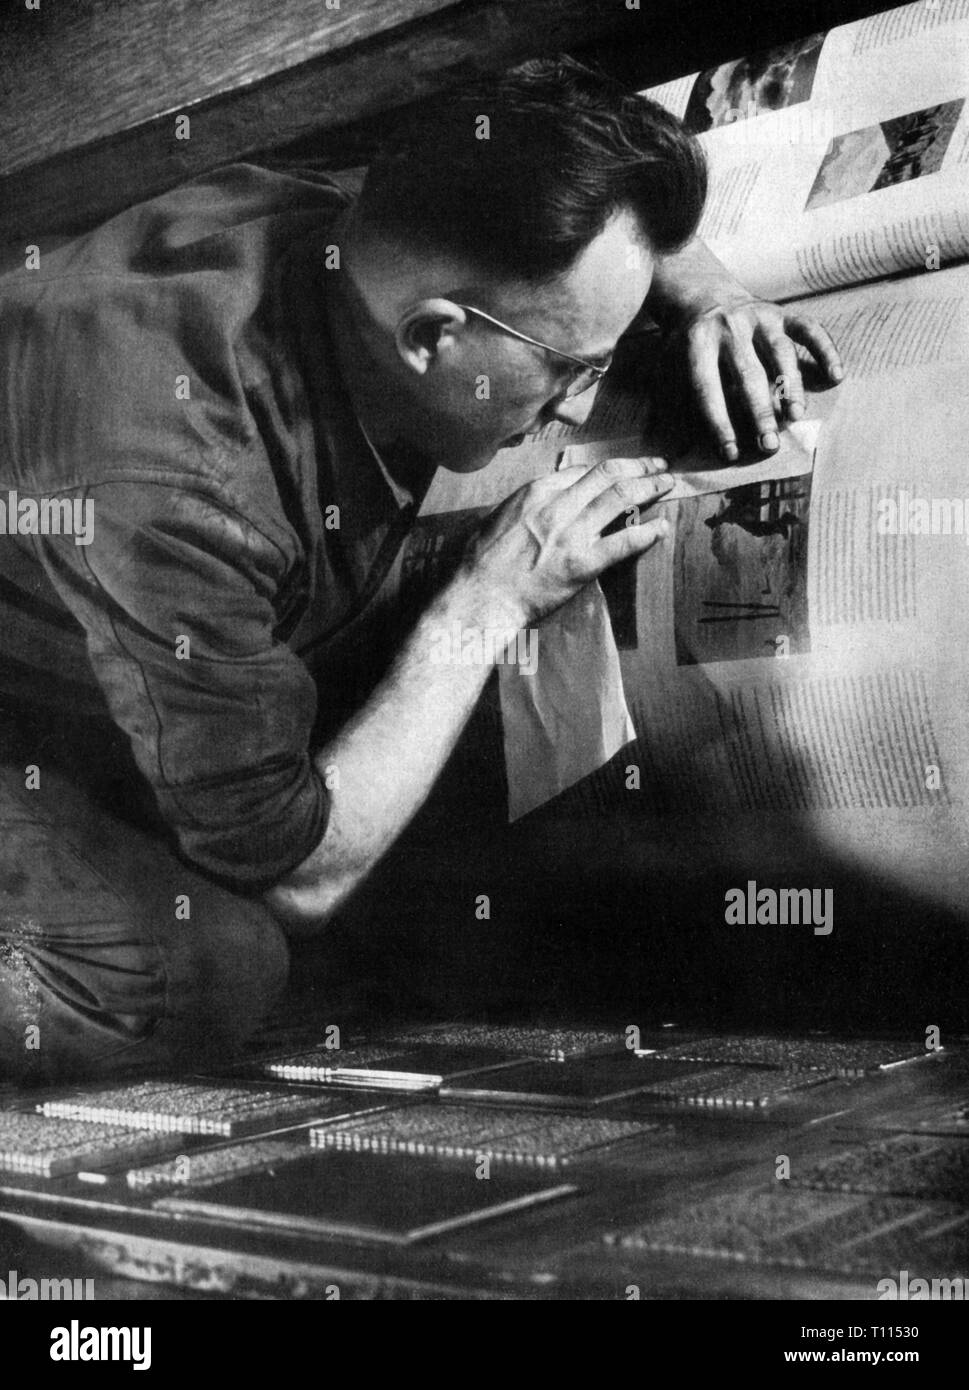 Technics, stampa tipografica, typesetter al lavoro, Berlino, 1937, Additional-Rights-Clearance-Info-Not-Available Foto Stock